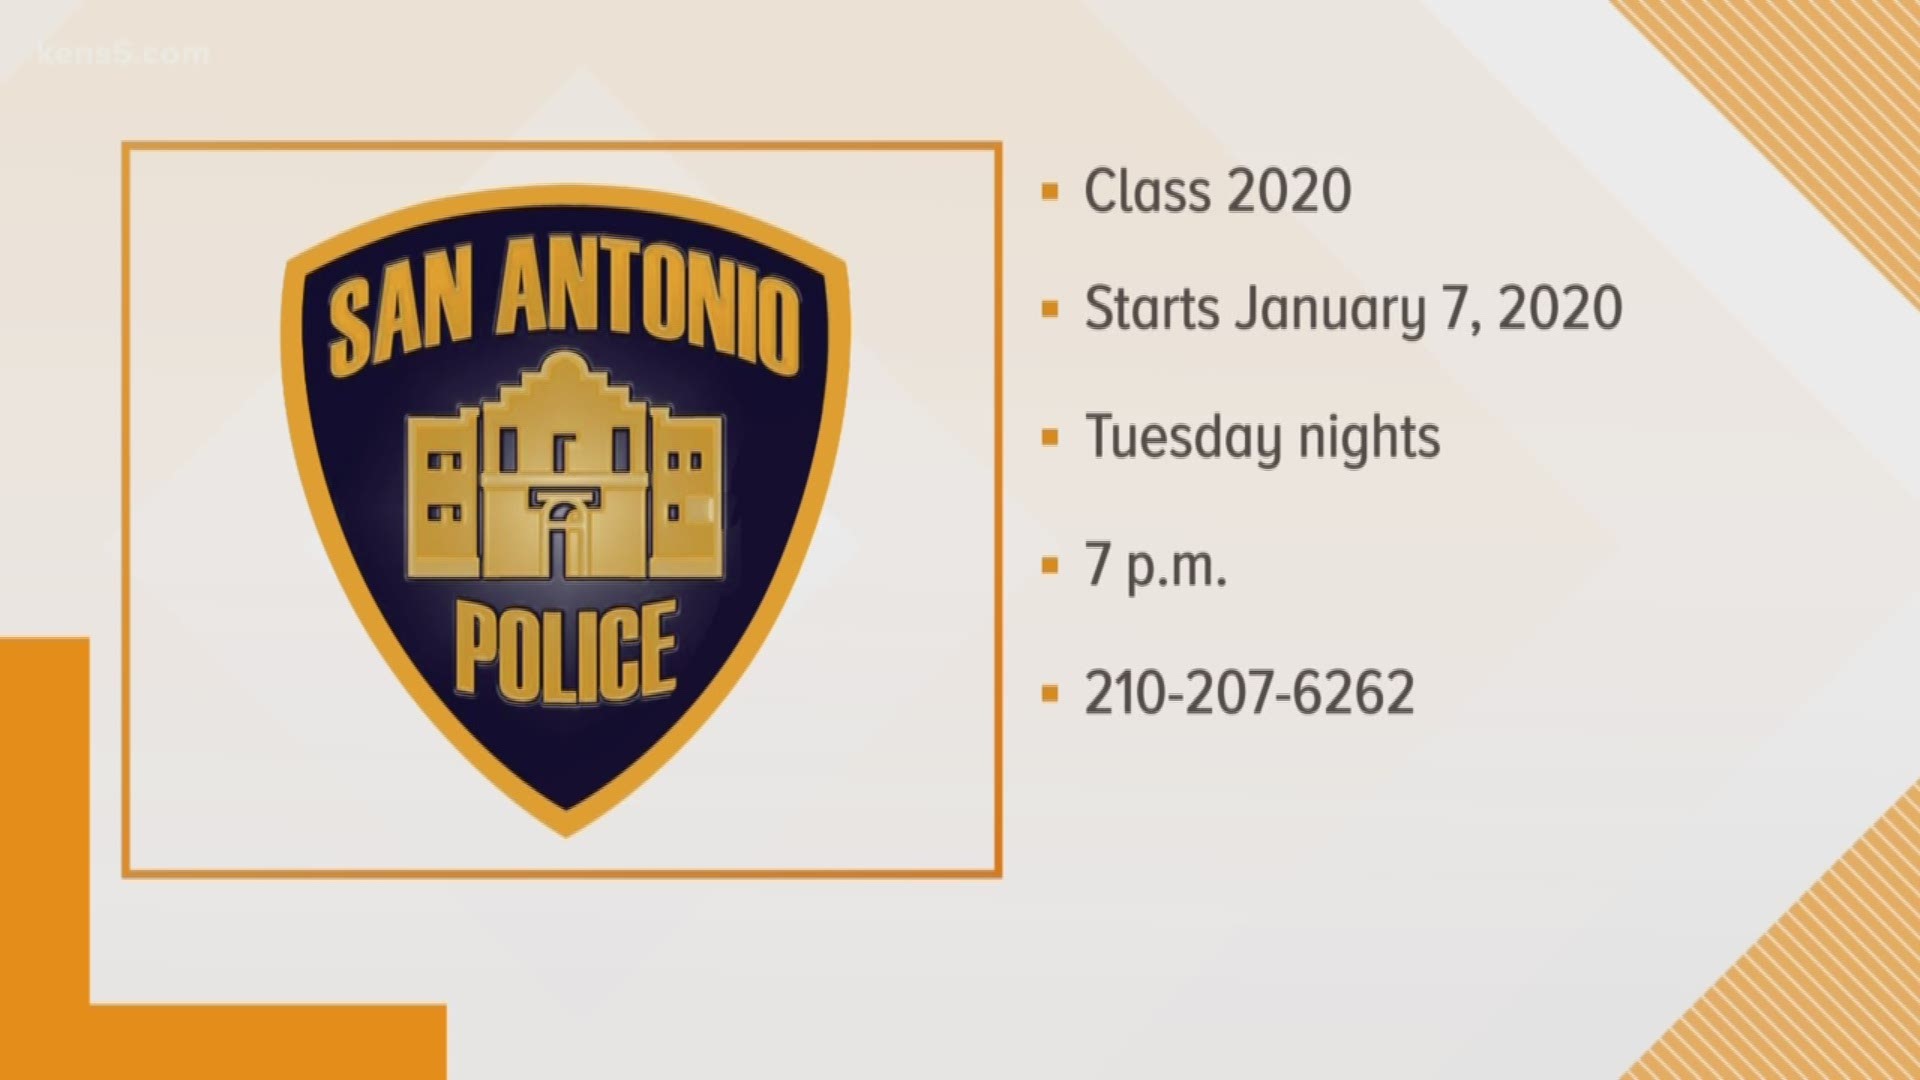 SAPD wants you to learn what it takes to wear the badge so we can all make San Antonio safer.